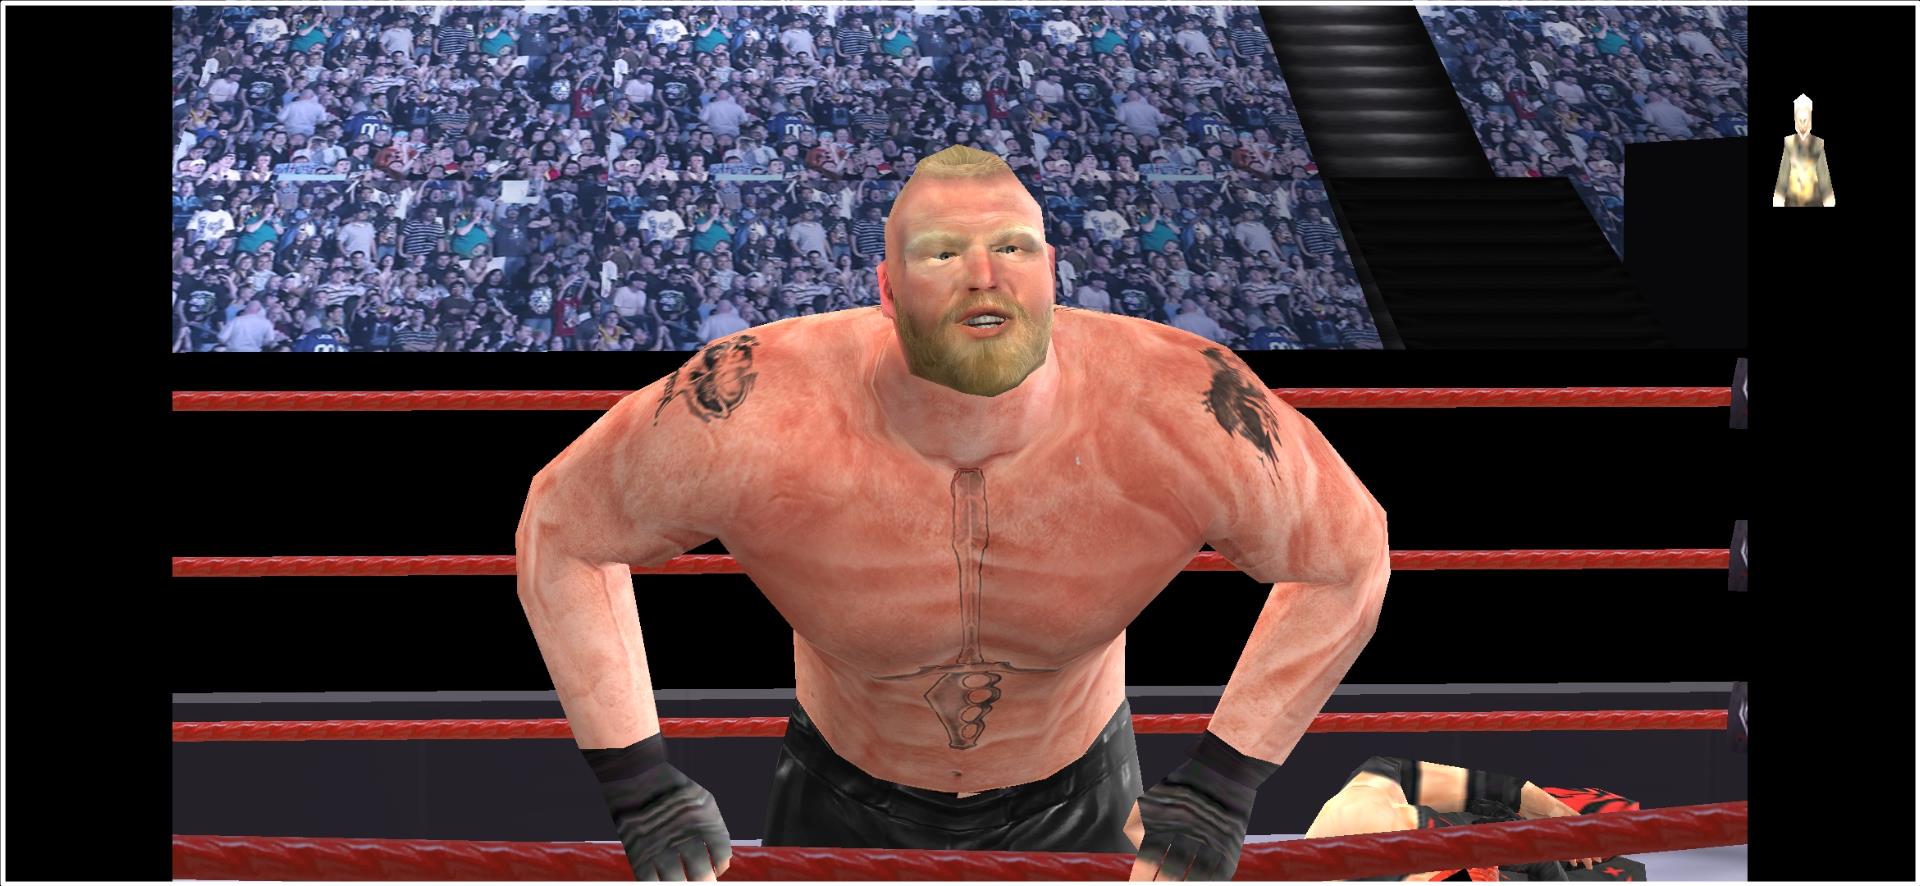 WWE 2K22 PPSSPP Zip file for Android Download